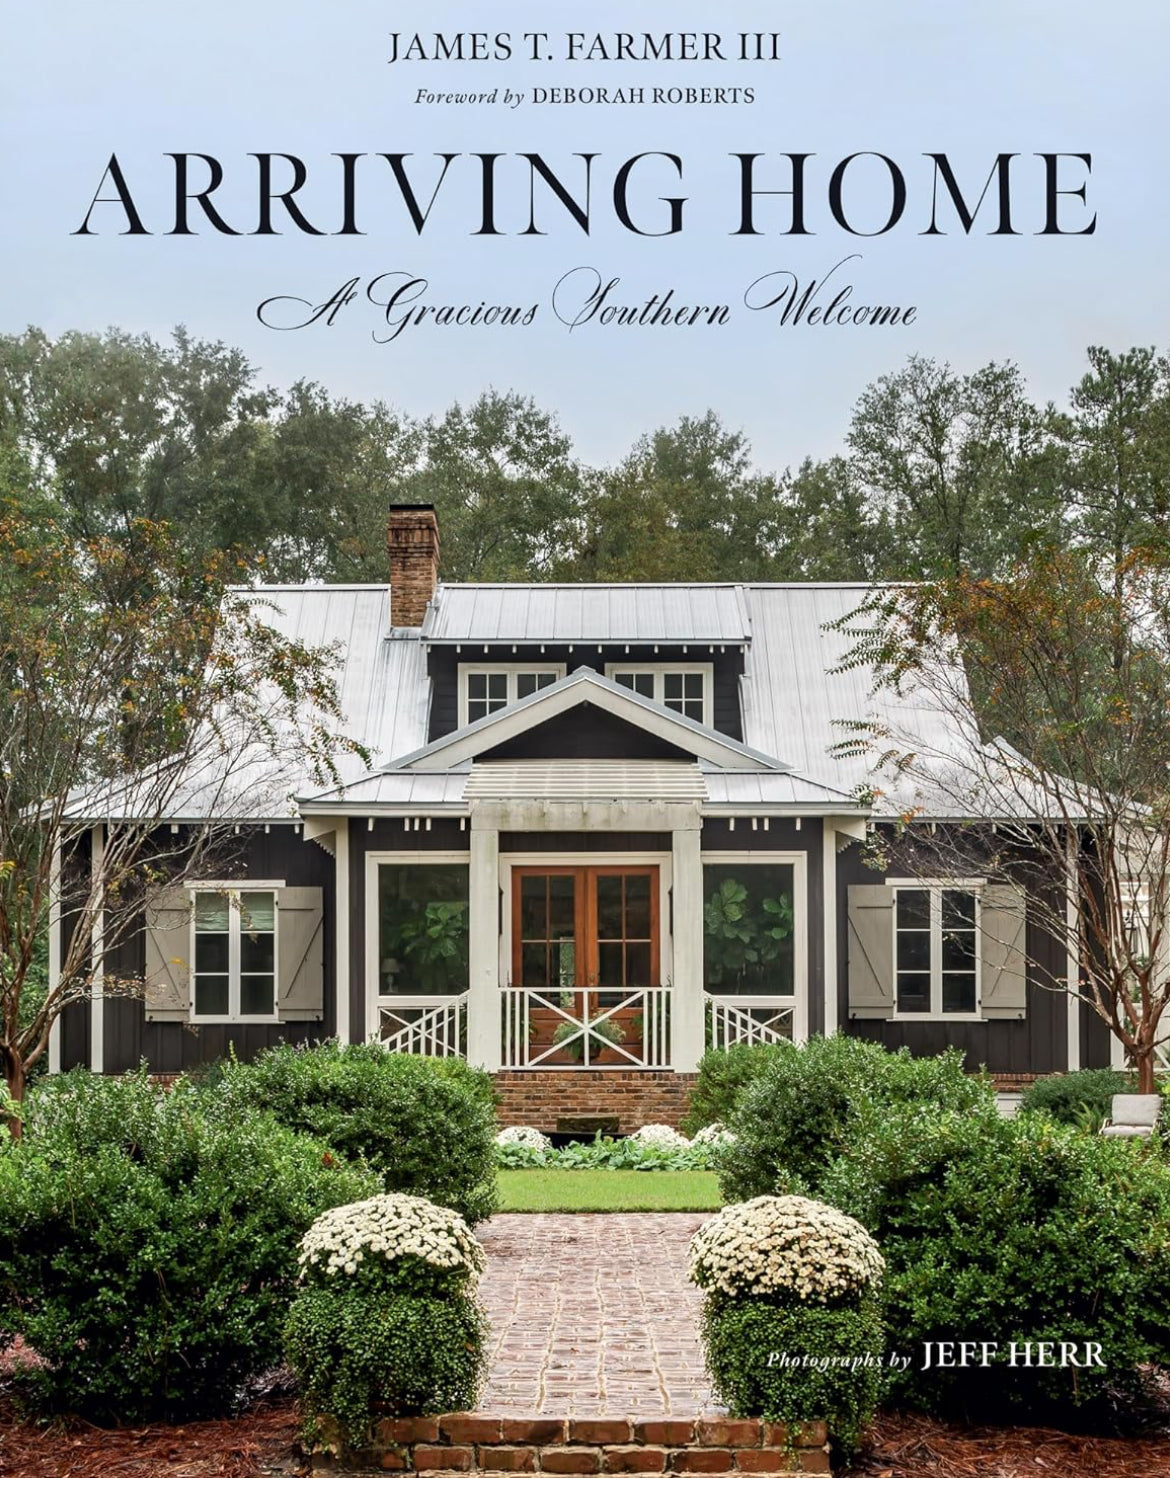 “Arriving Home” by James T. Farmer